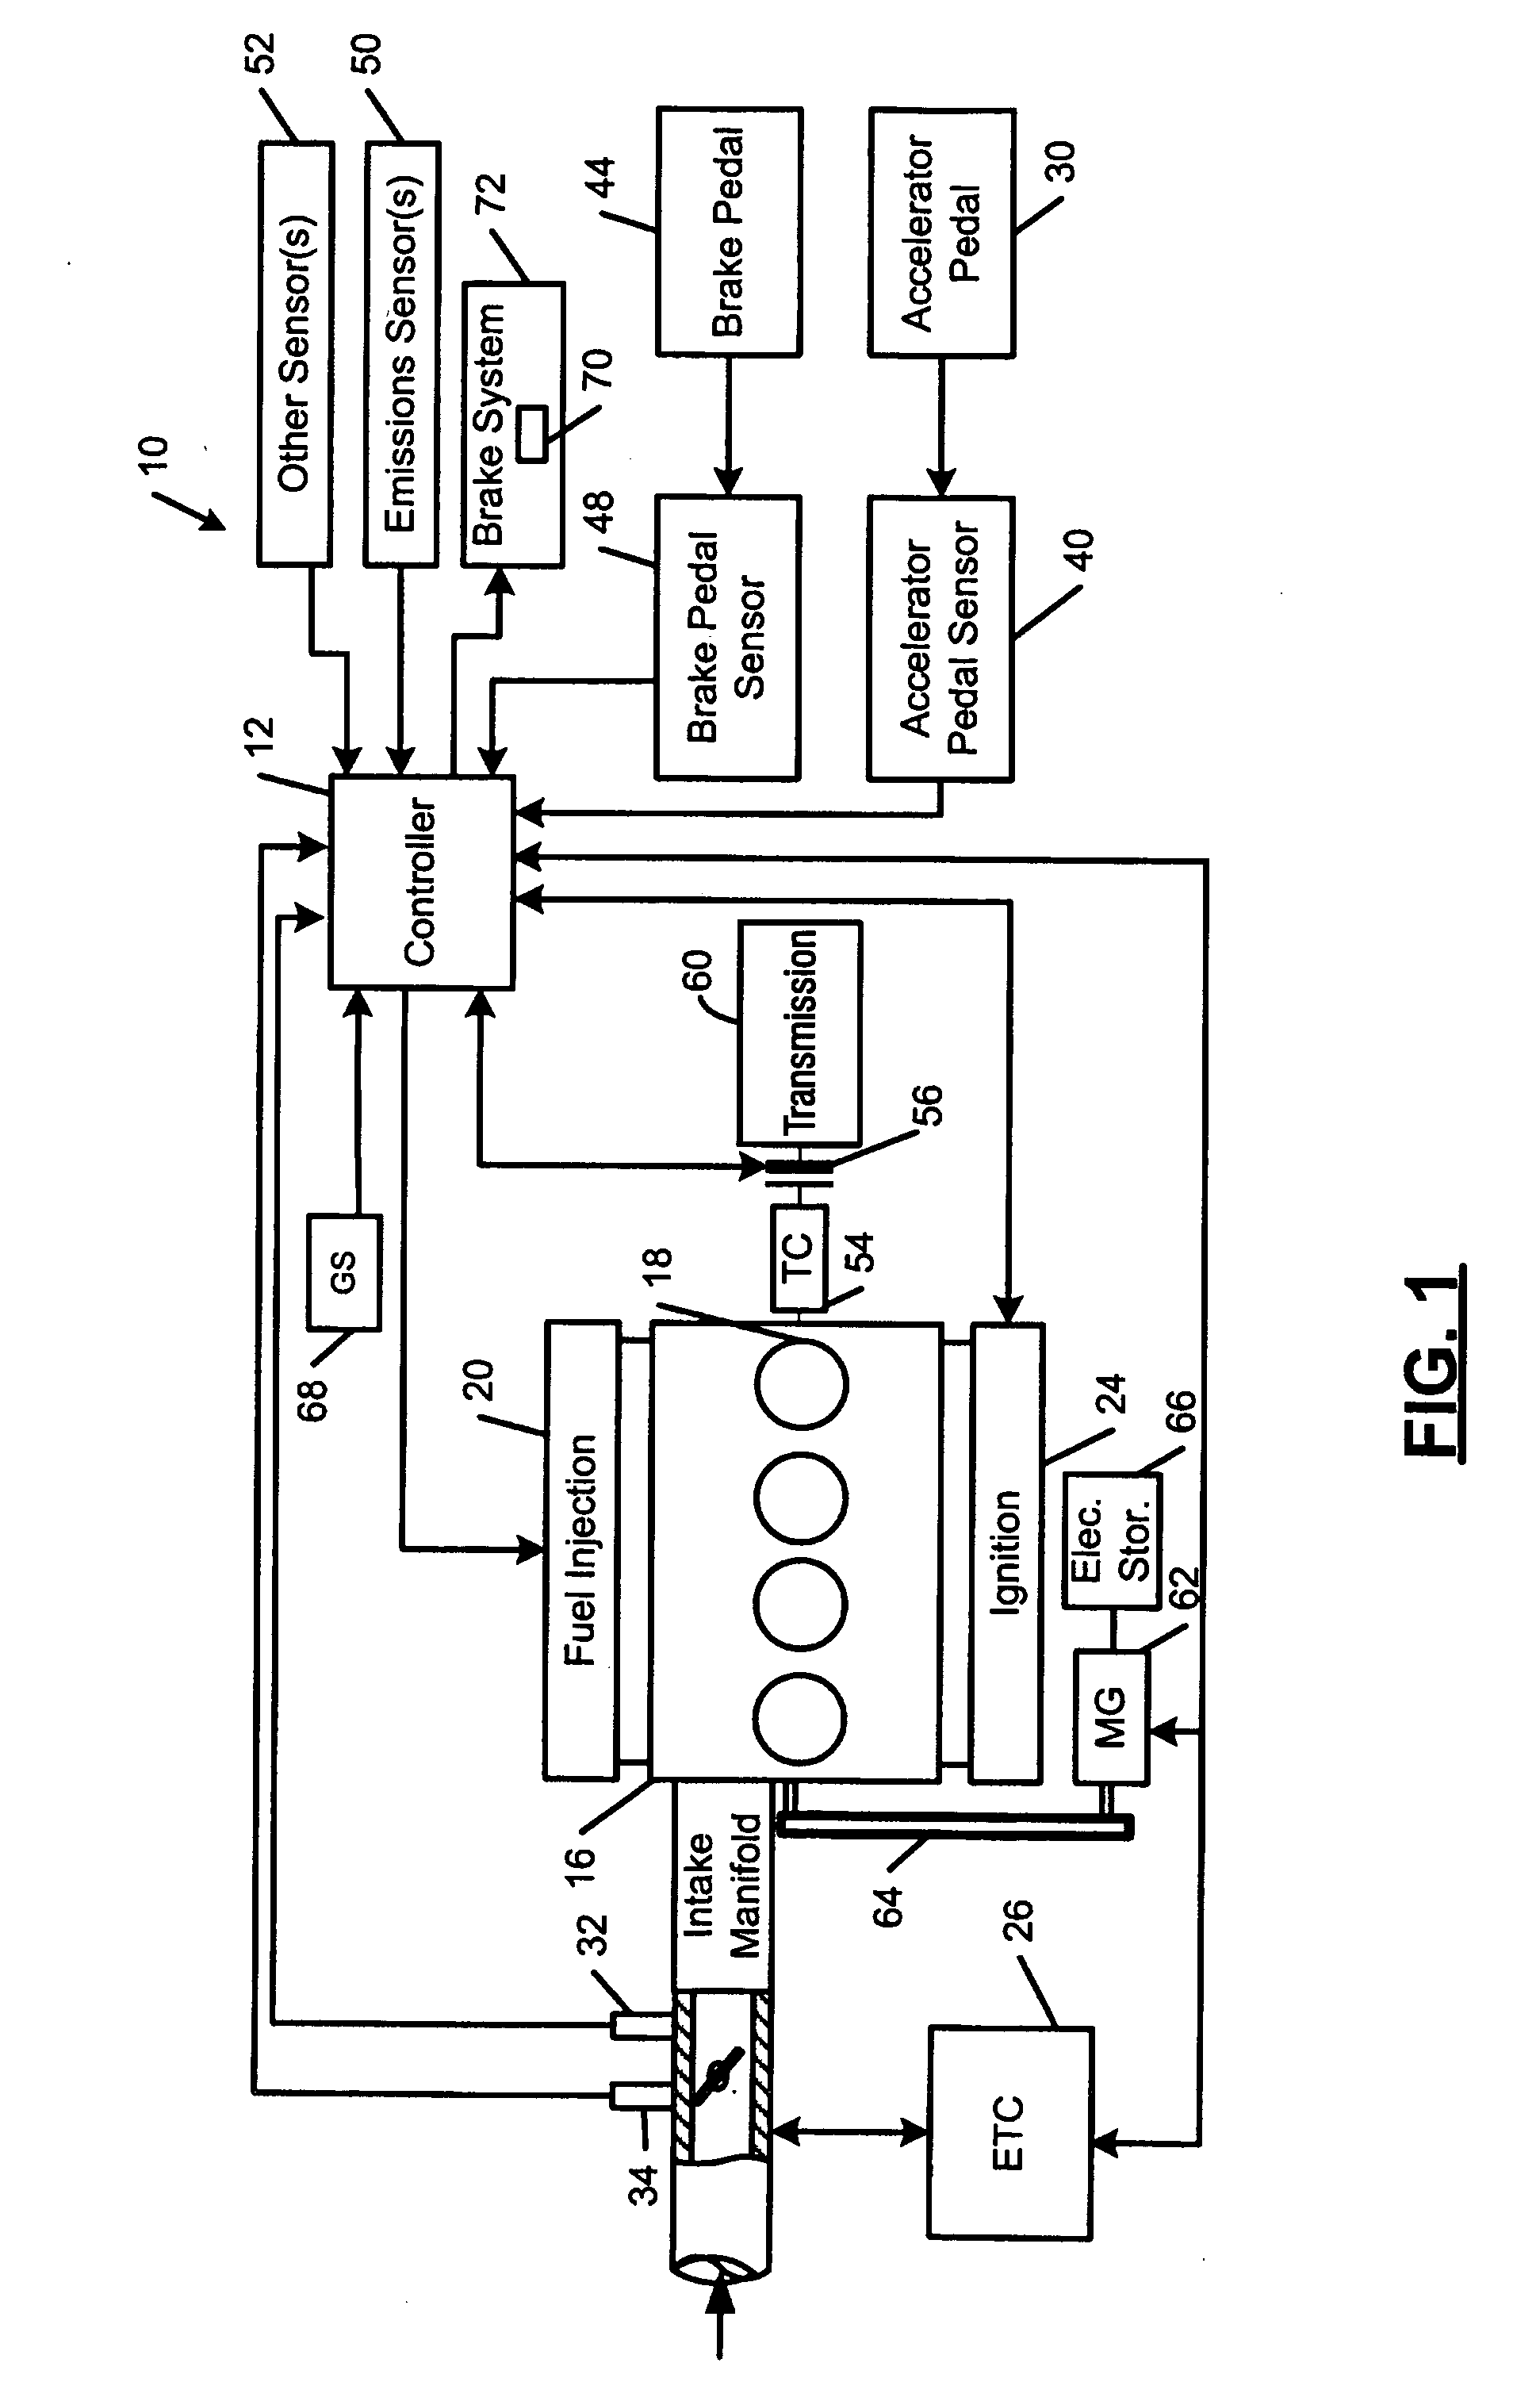 Anti-rollback control via grade information for hybrid and conventional vehicles